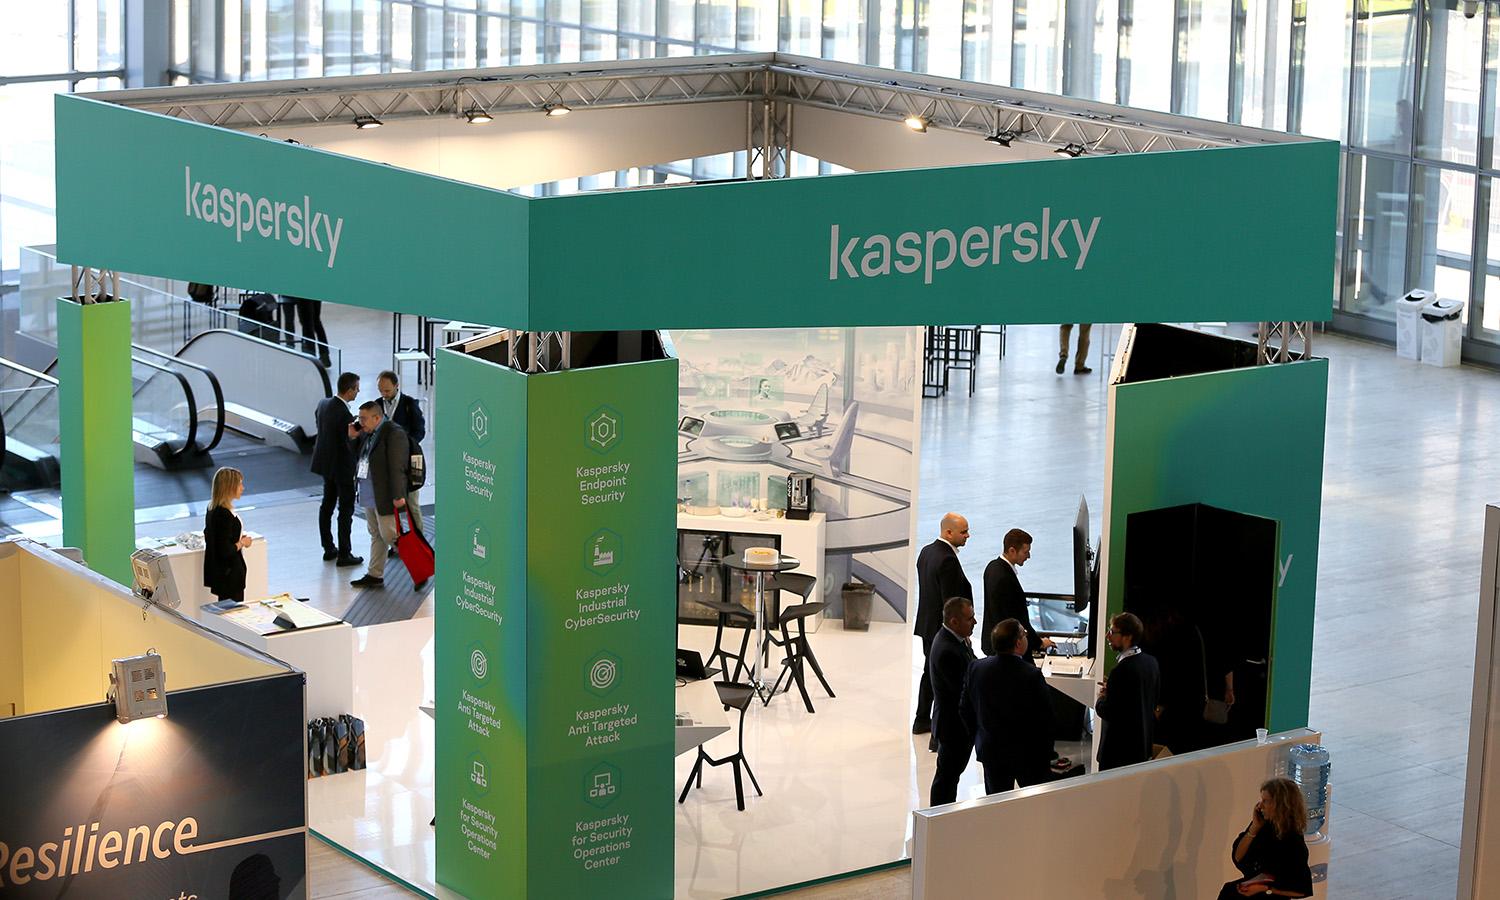 The Kaspersky booth is seen Sept. 24, 2019, during Cybertech Europe 2019 in Rome. (Photo by Ernesto S. Ruscio/Getty Images)